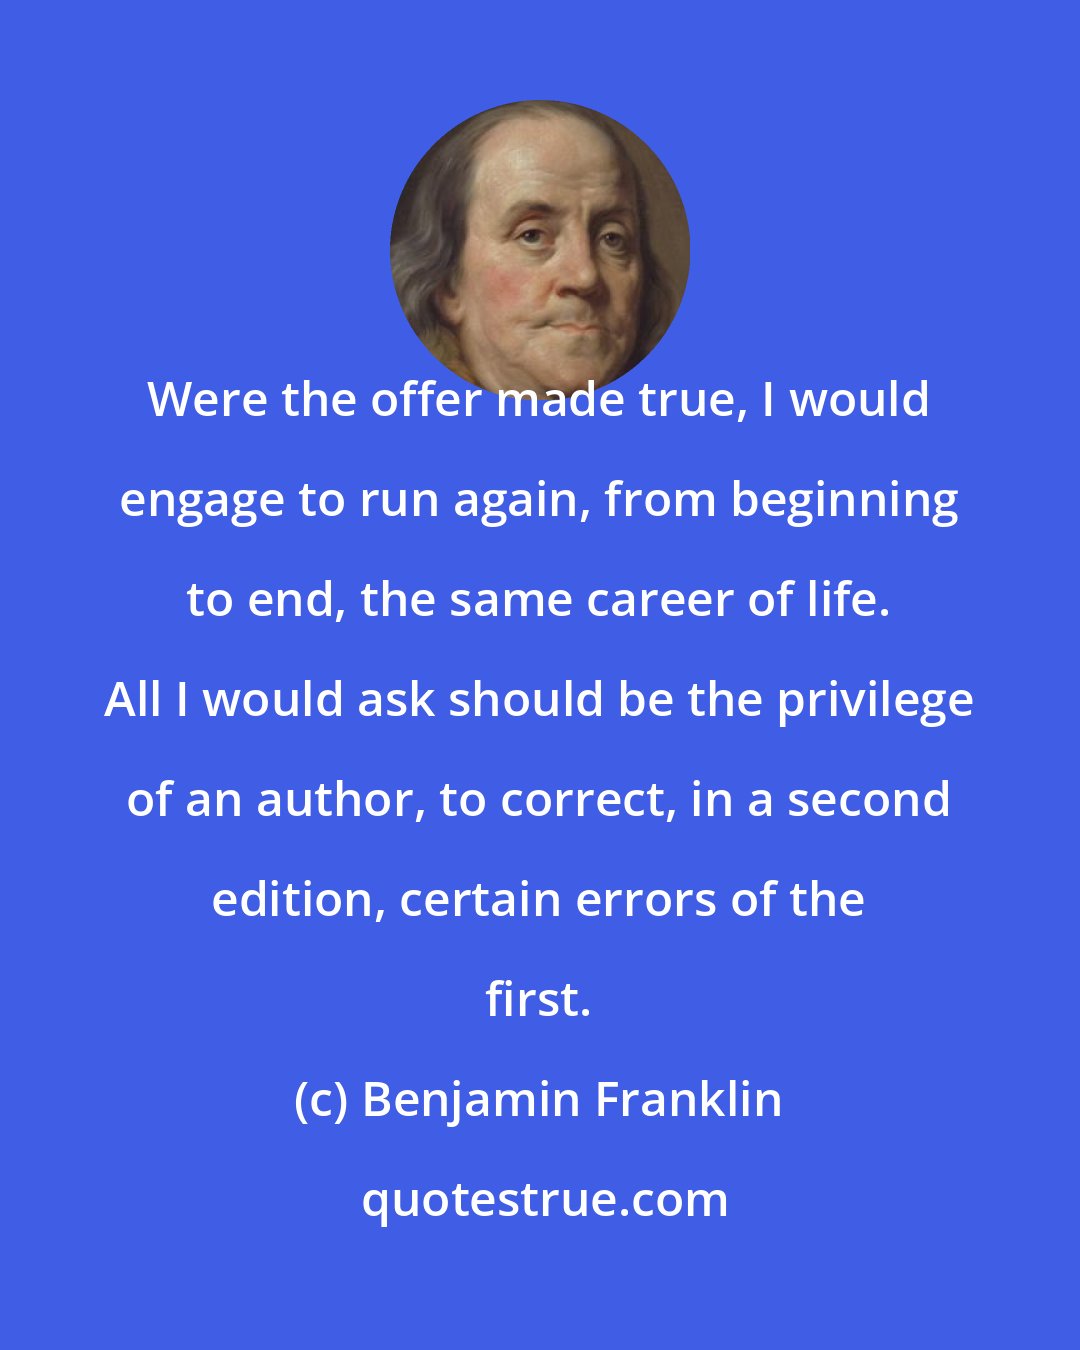 Benjamin Franklin: Were the offer made true, I would engage to run again, from beginning to end, the same career of life. All I would ask should be the privilege of an author, to correct, in a second edition, certain errors of the first.